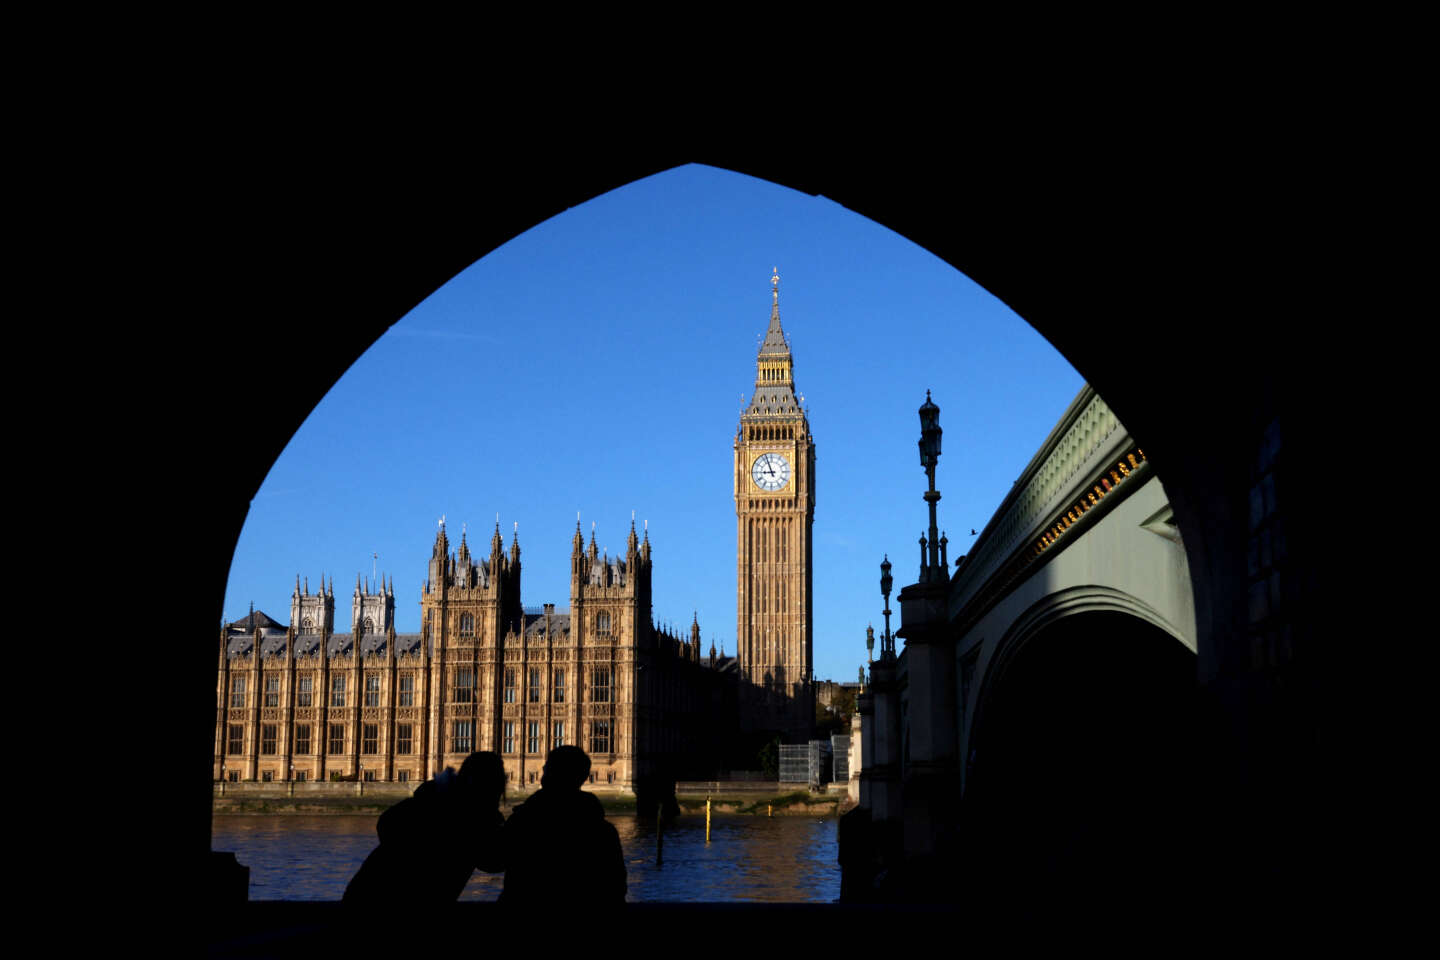 London's Big Ben is finally restored, but the rest of Westminster is threatened by decay